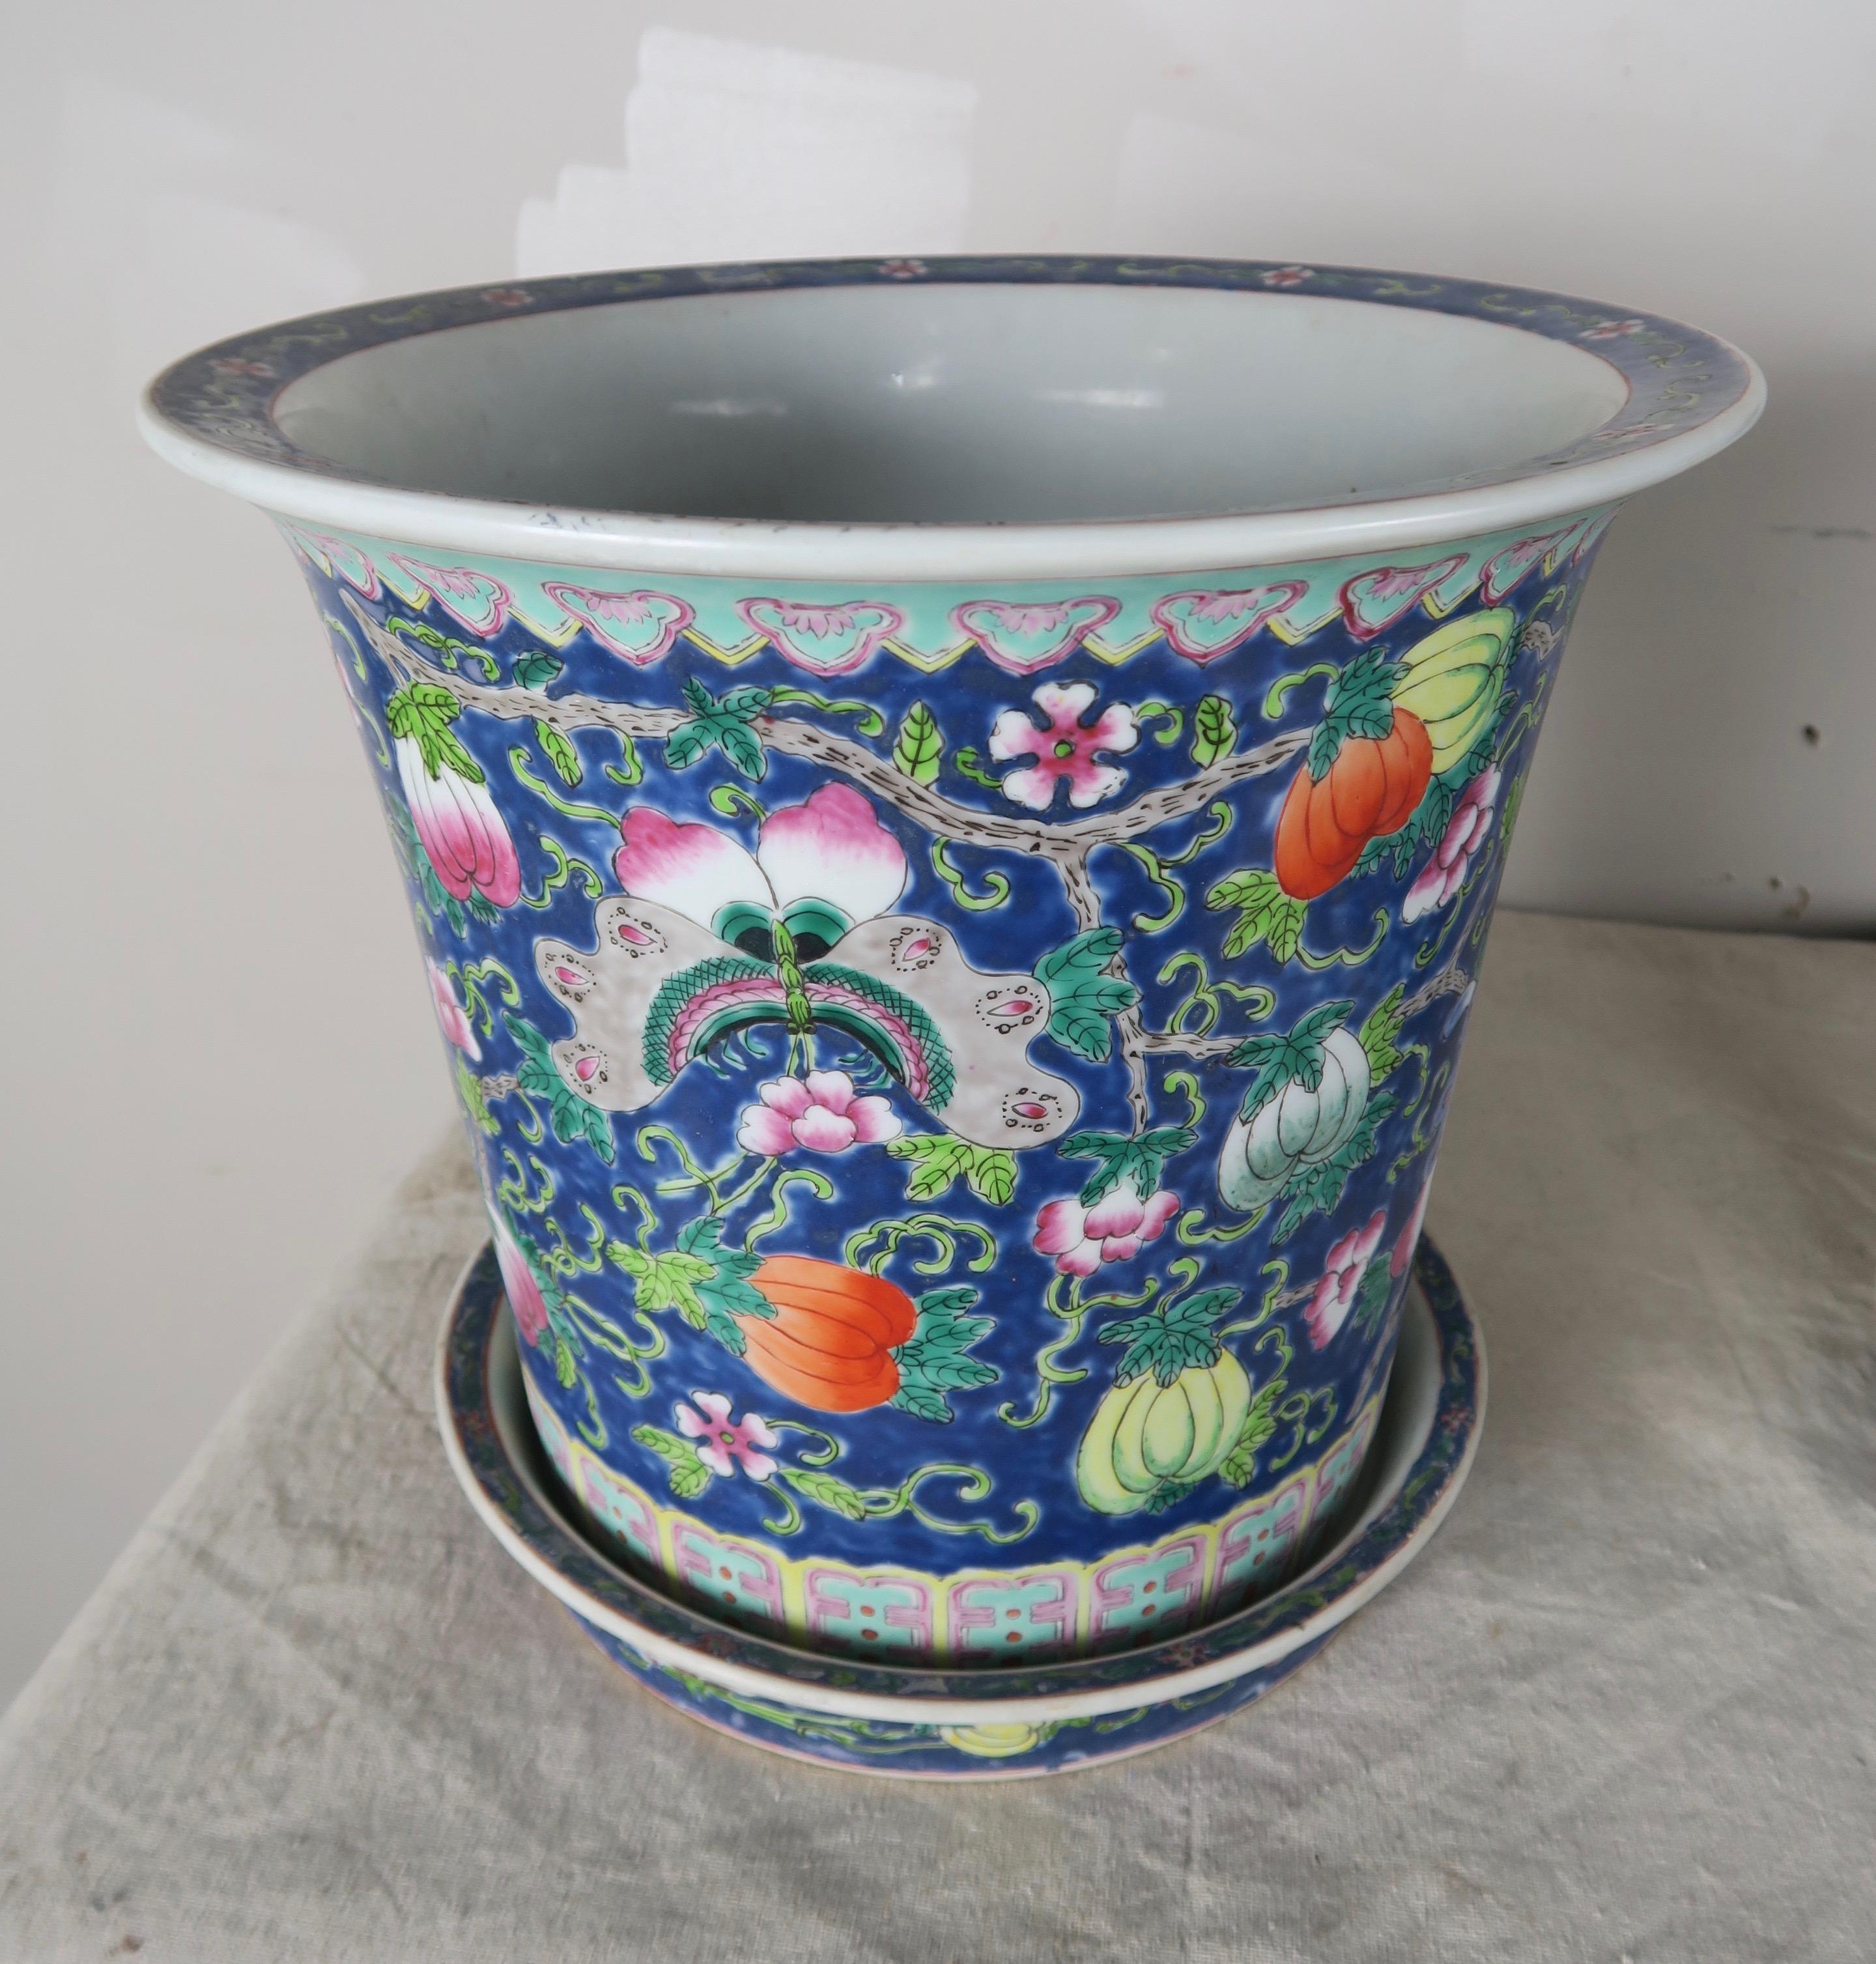 Other Pair of Hand Painted Ceramic Pots